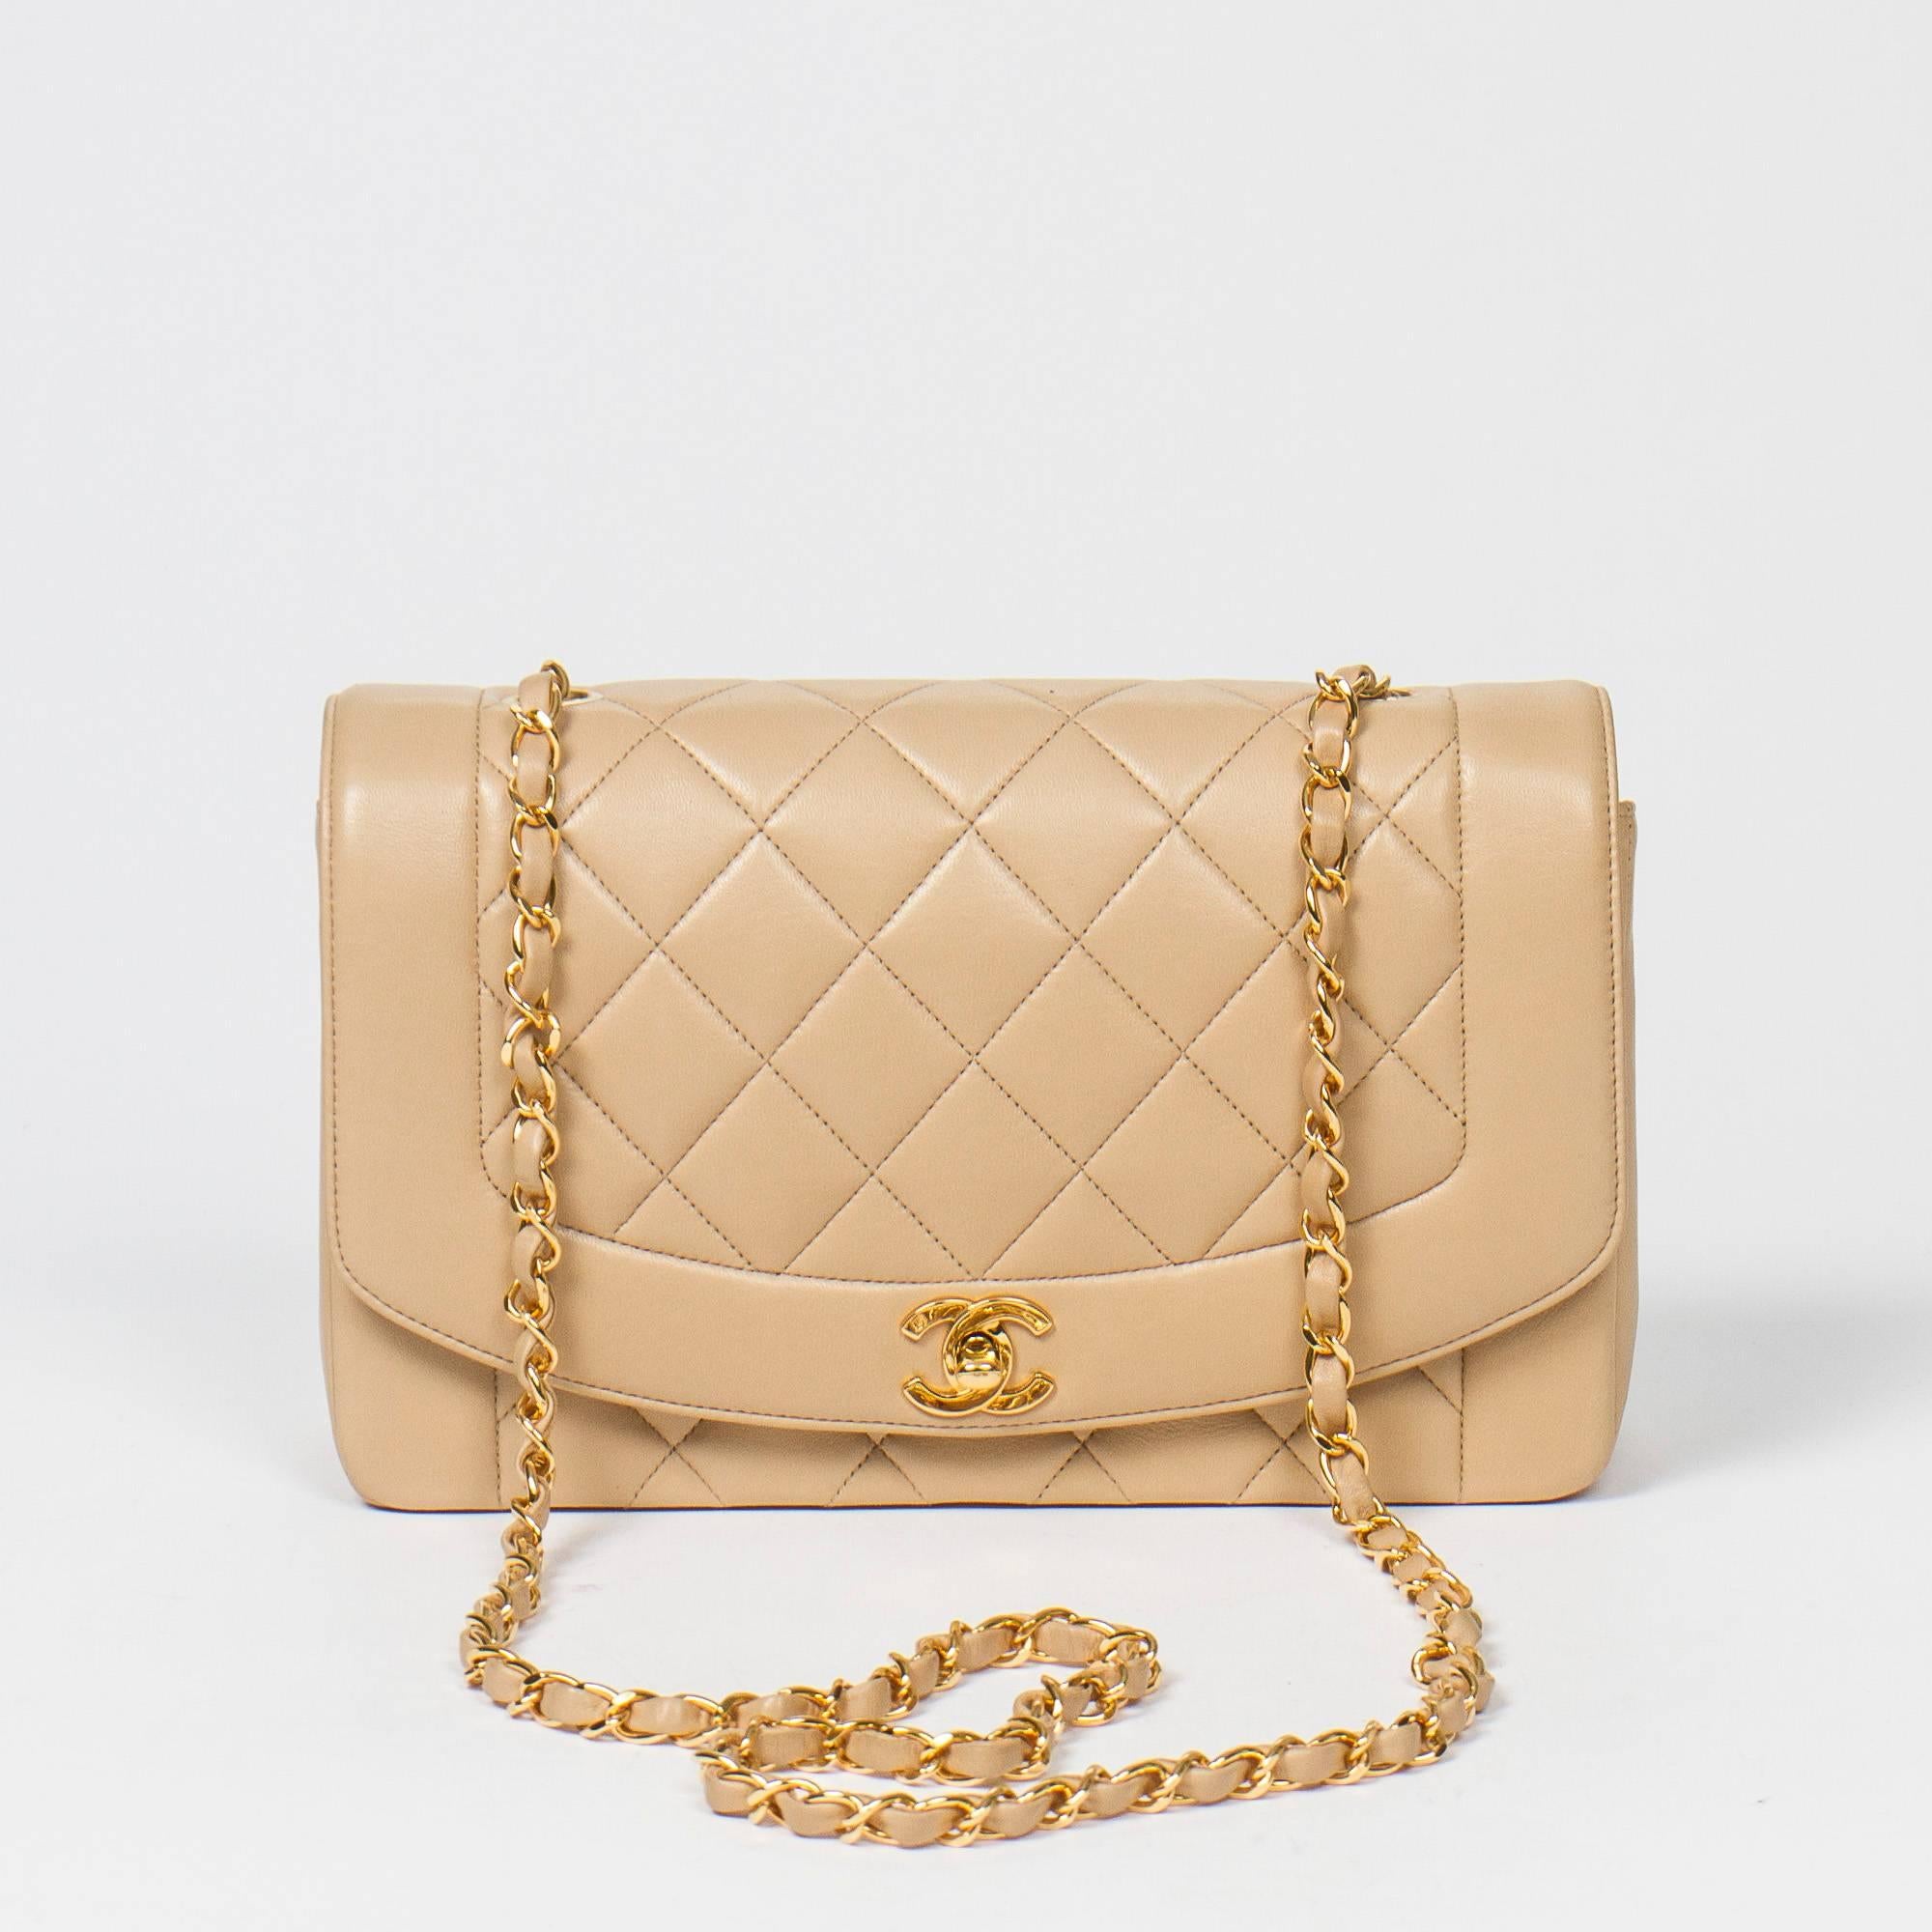 Women's Chanel Mademoiselle Flap in beige quilted calf leather